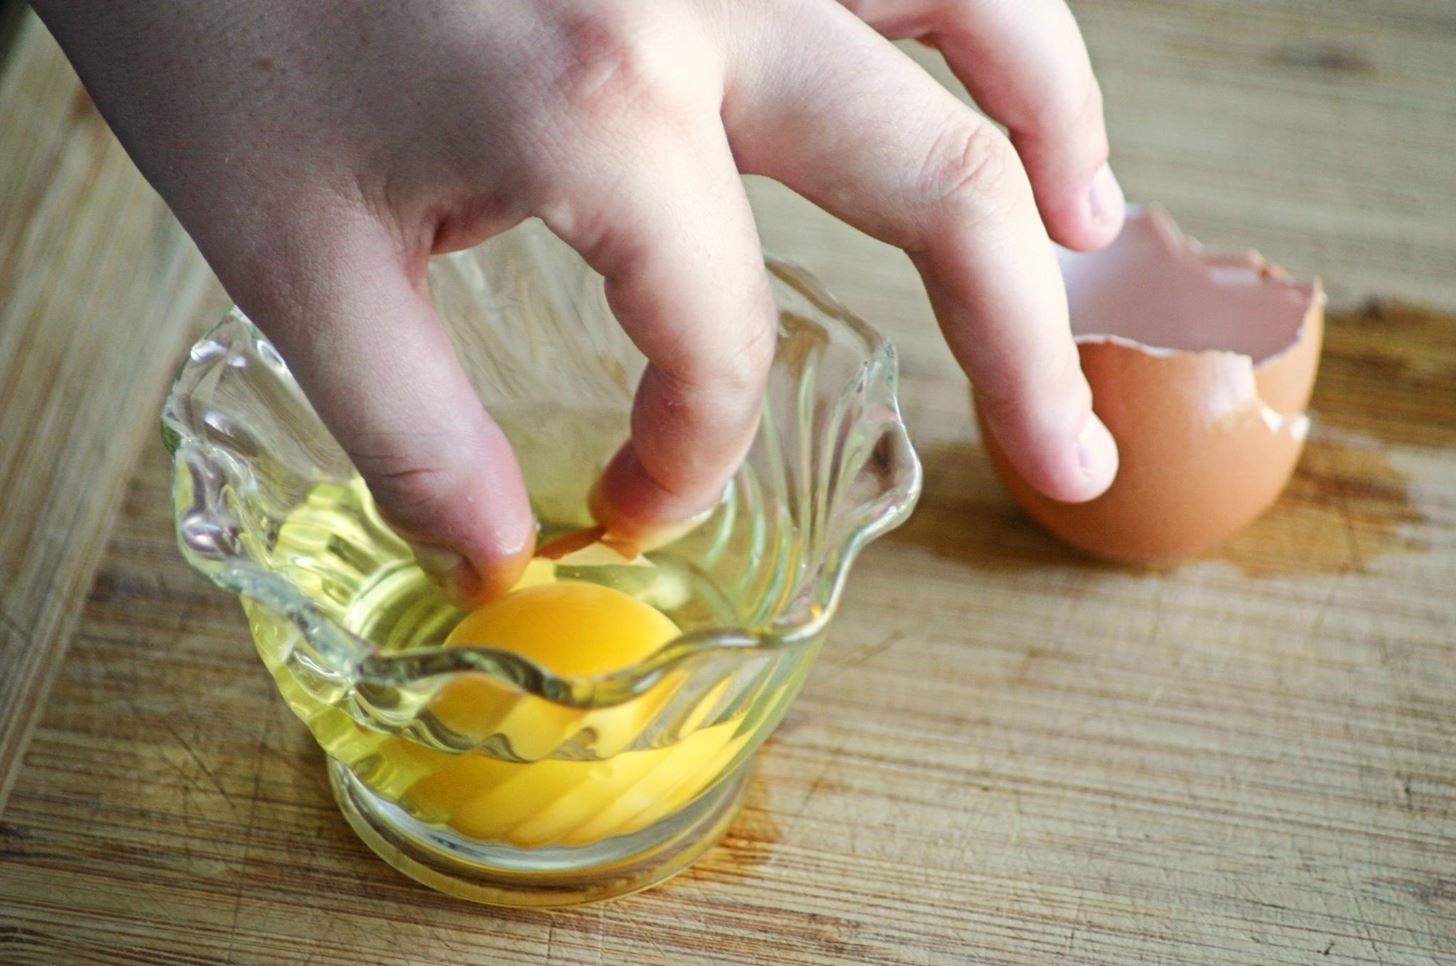 The Fastest Way to Get Pieces of Shell Out of Your Egg